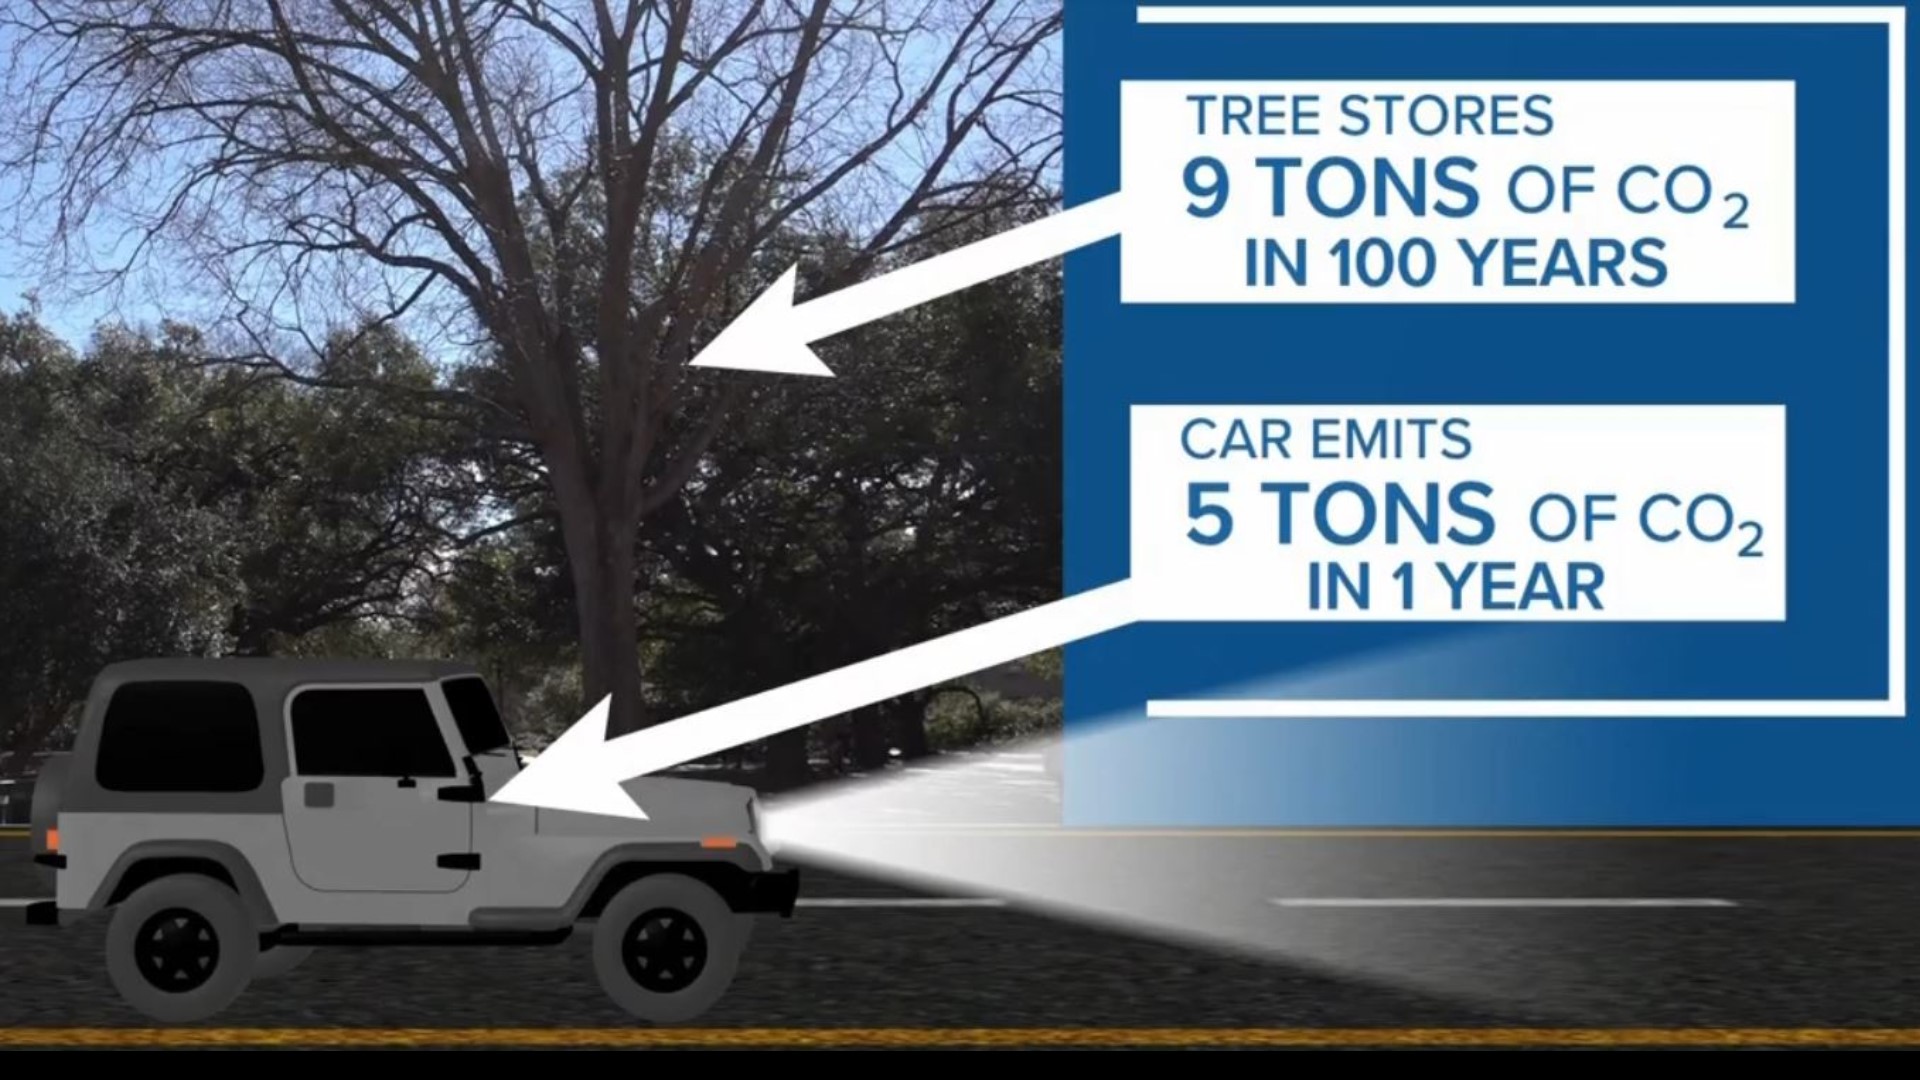 Trees need carbon dioxide to survive, but we took a look at the numbers and it turns out trees alone can't keep up with our carbon dioxide emissions.